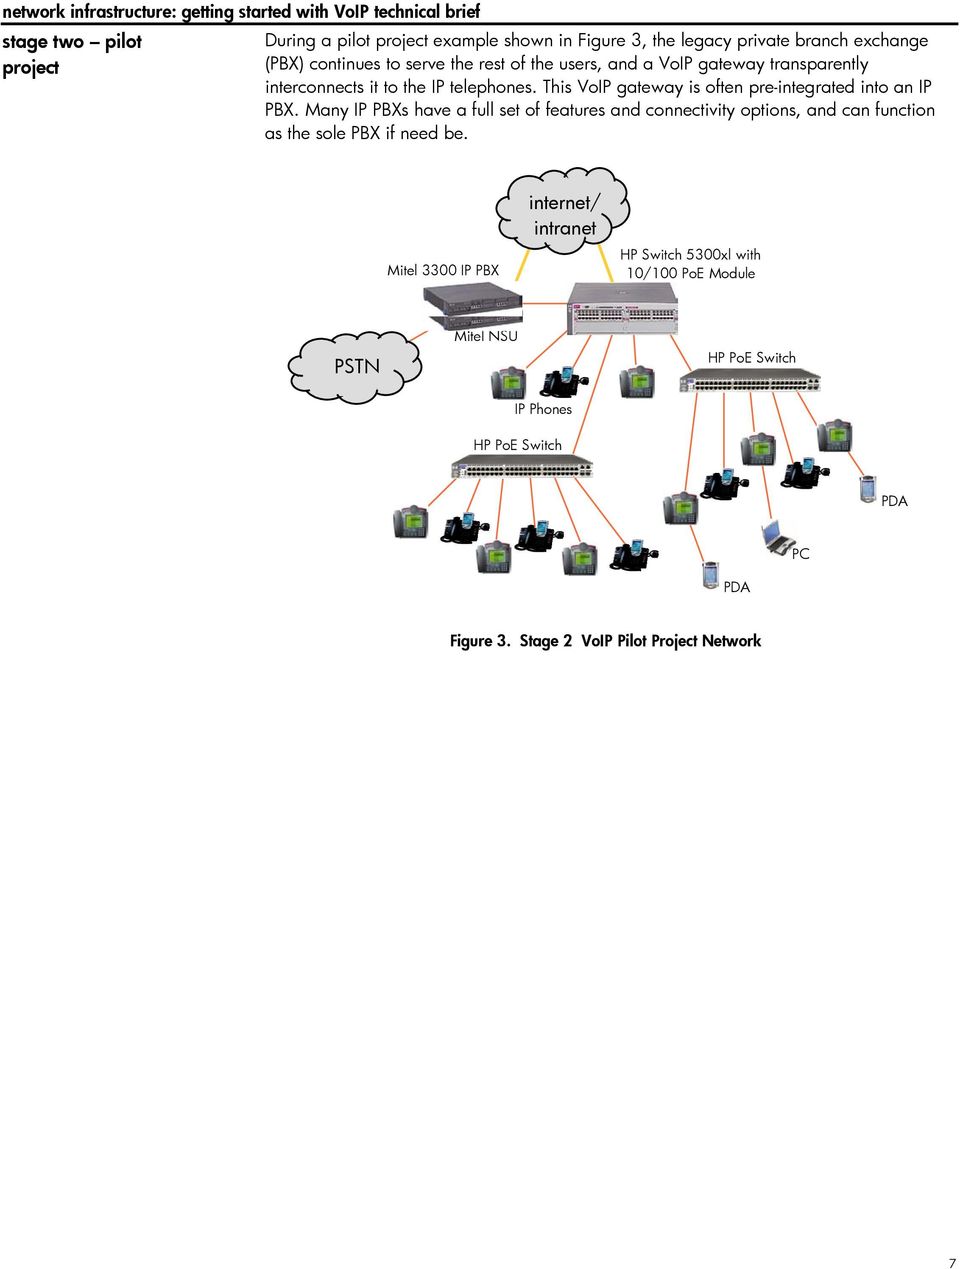 This VoIP gateway is often pre-integrated into an IP PBX.